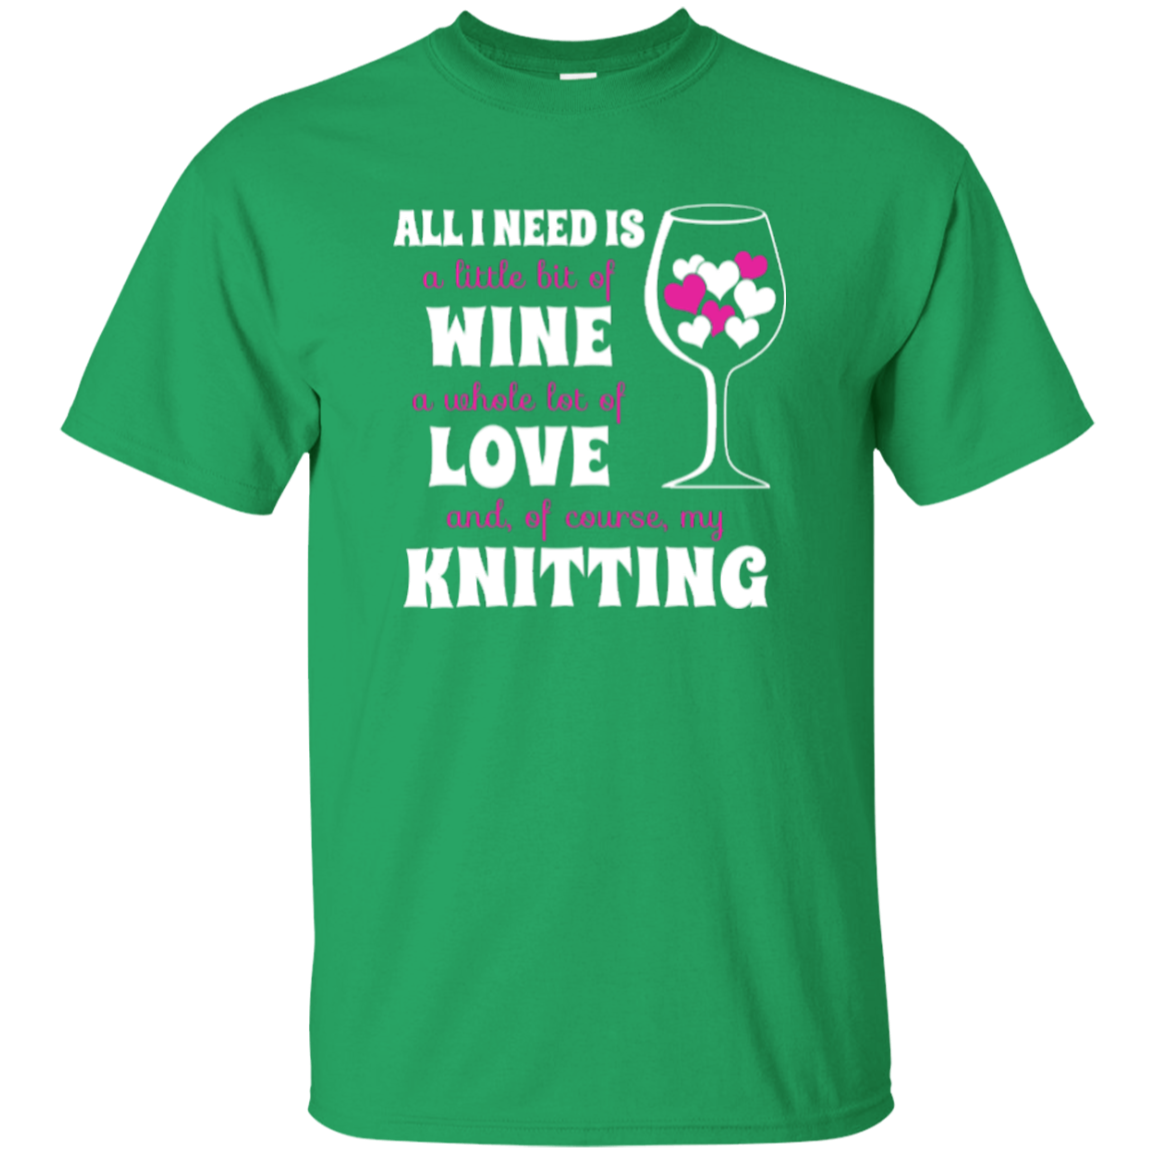 All I Need is Wine-Love-Knitting Custom Ultra Cotton T-Shirt - Crafter4Life - 4